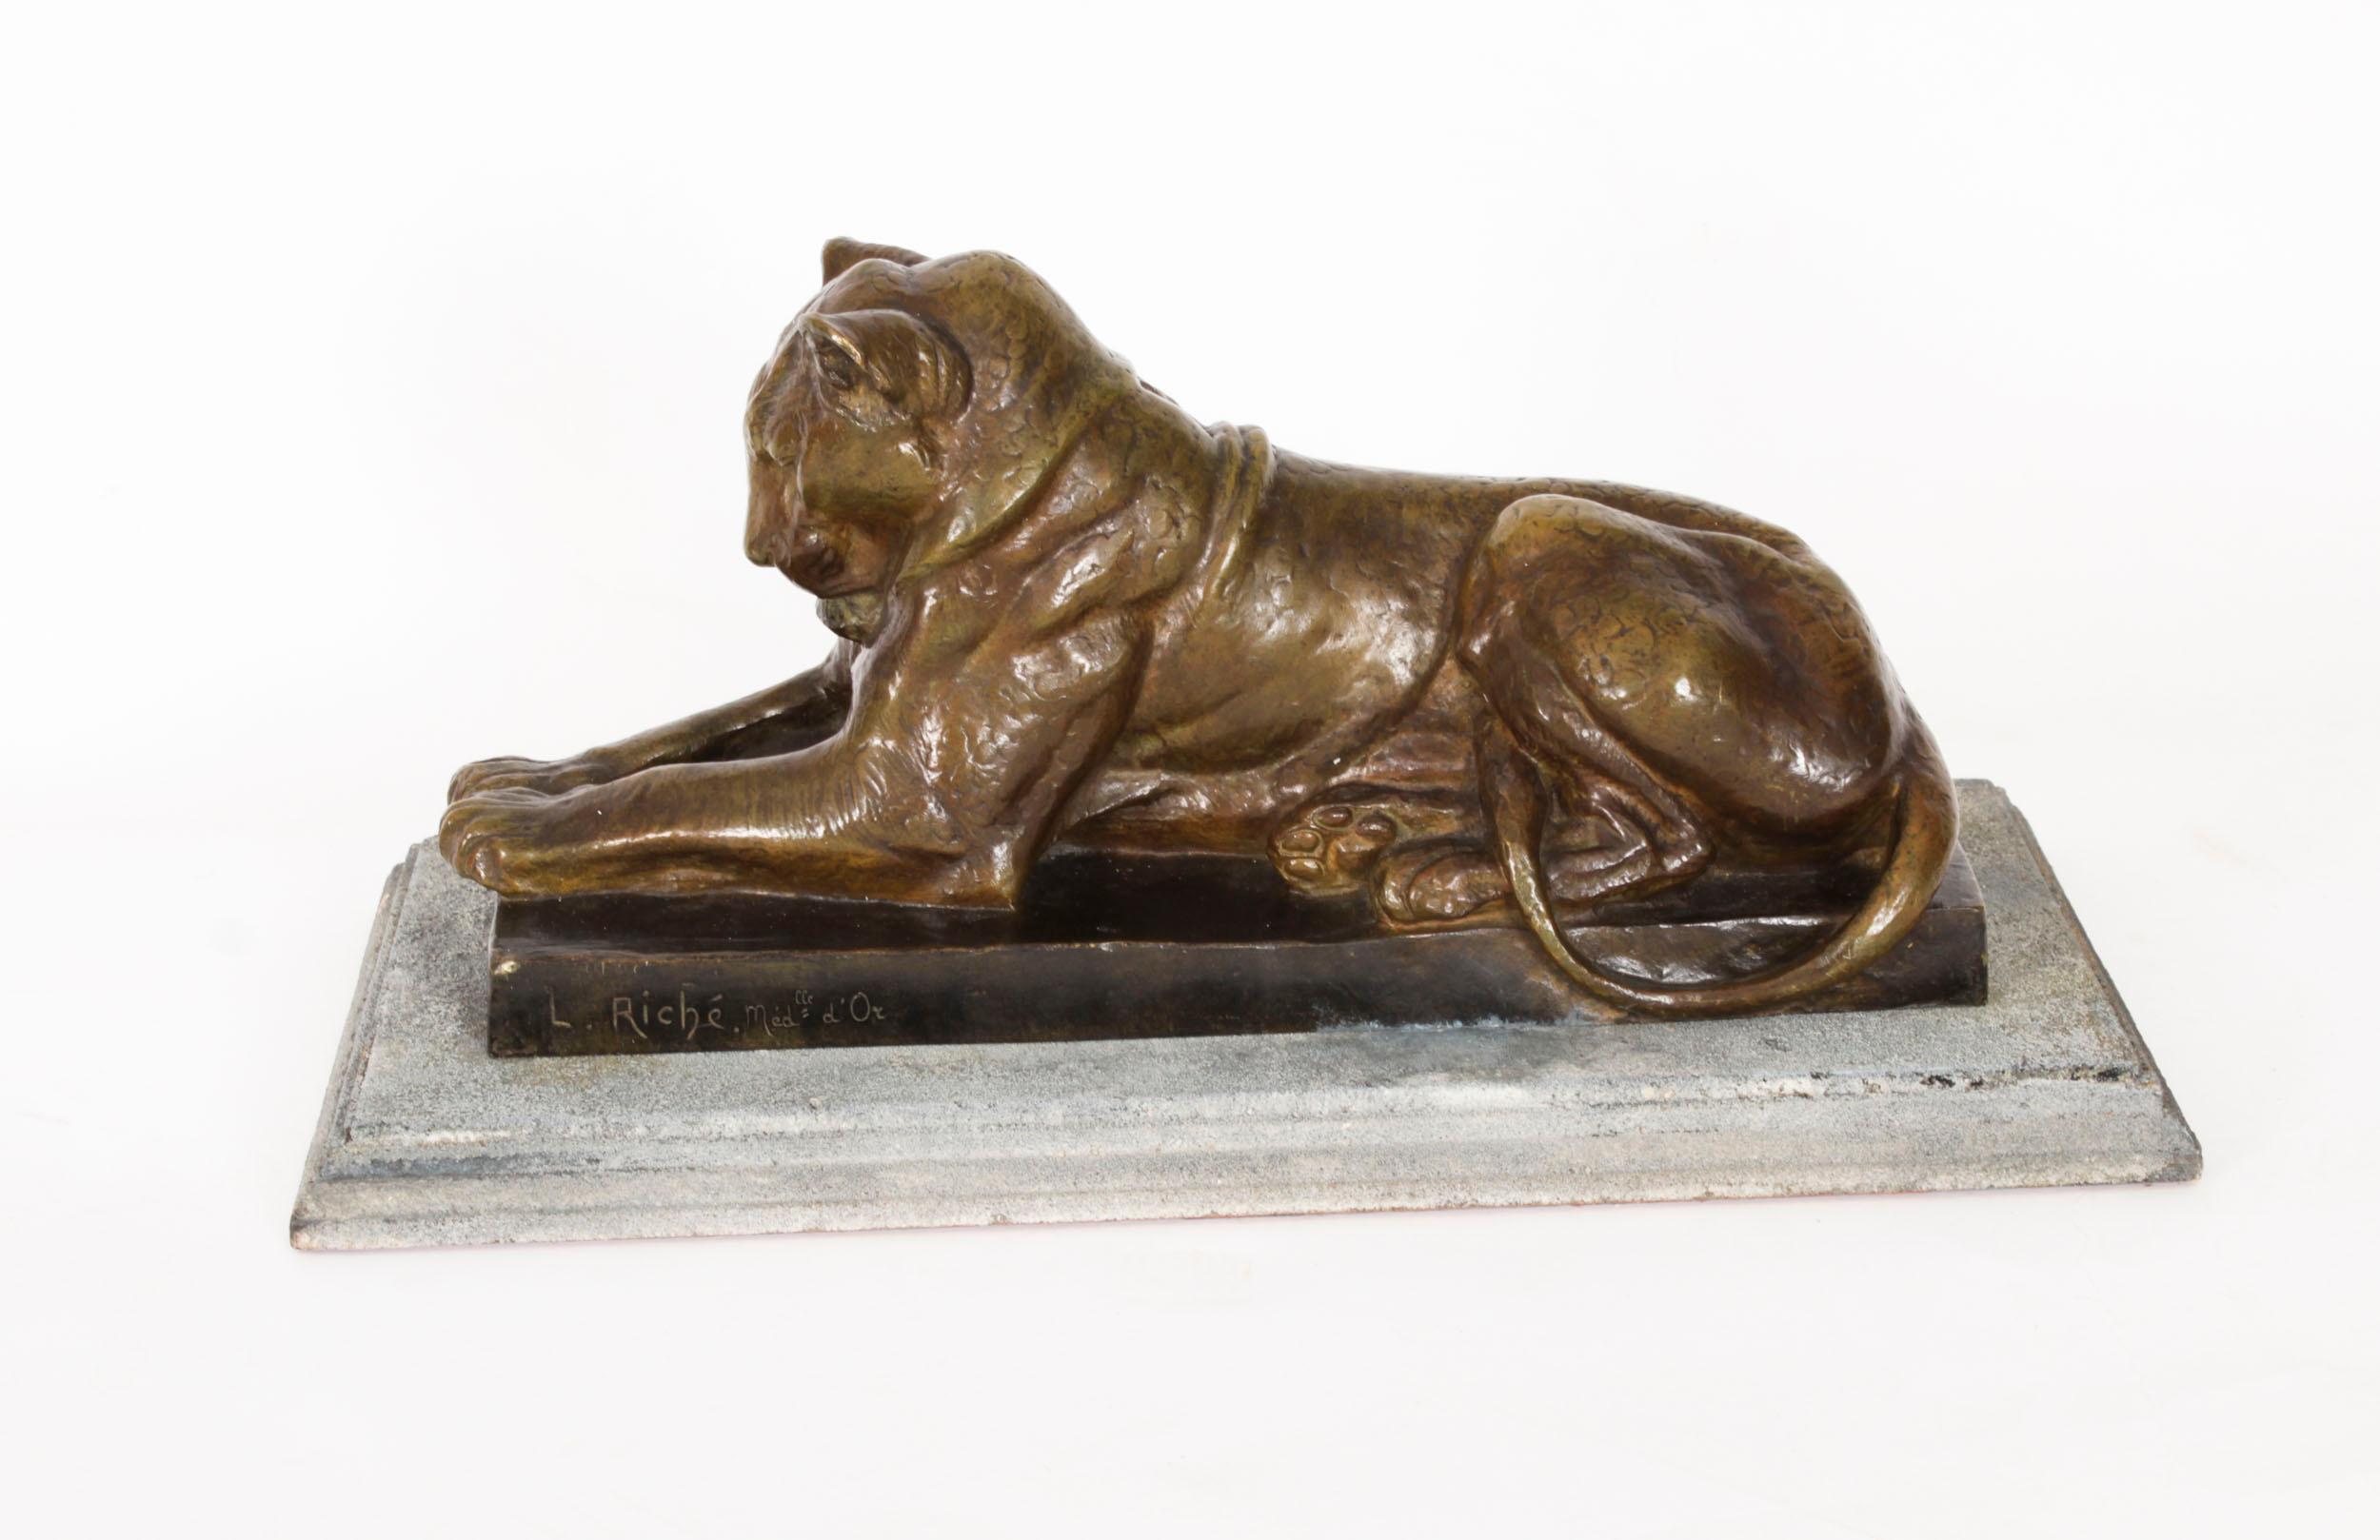 Antique French Bronze Sculpture of Lioness by Louis Riche Early 20th Century For Sale 3